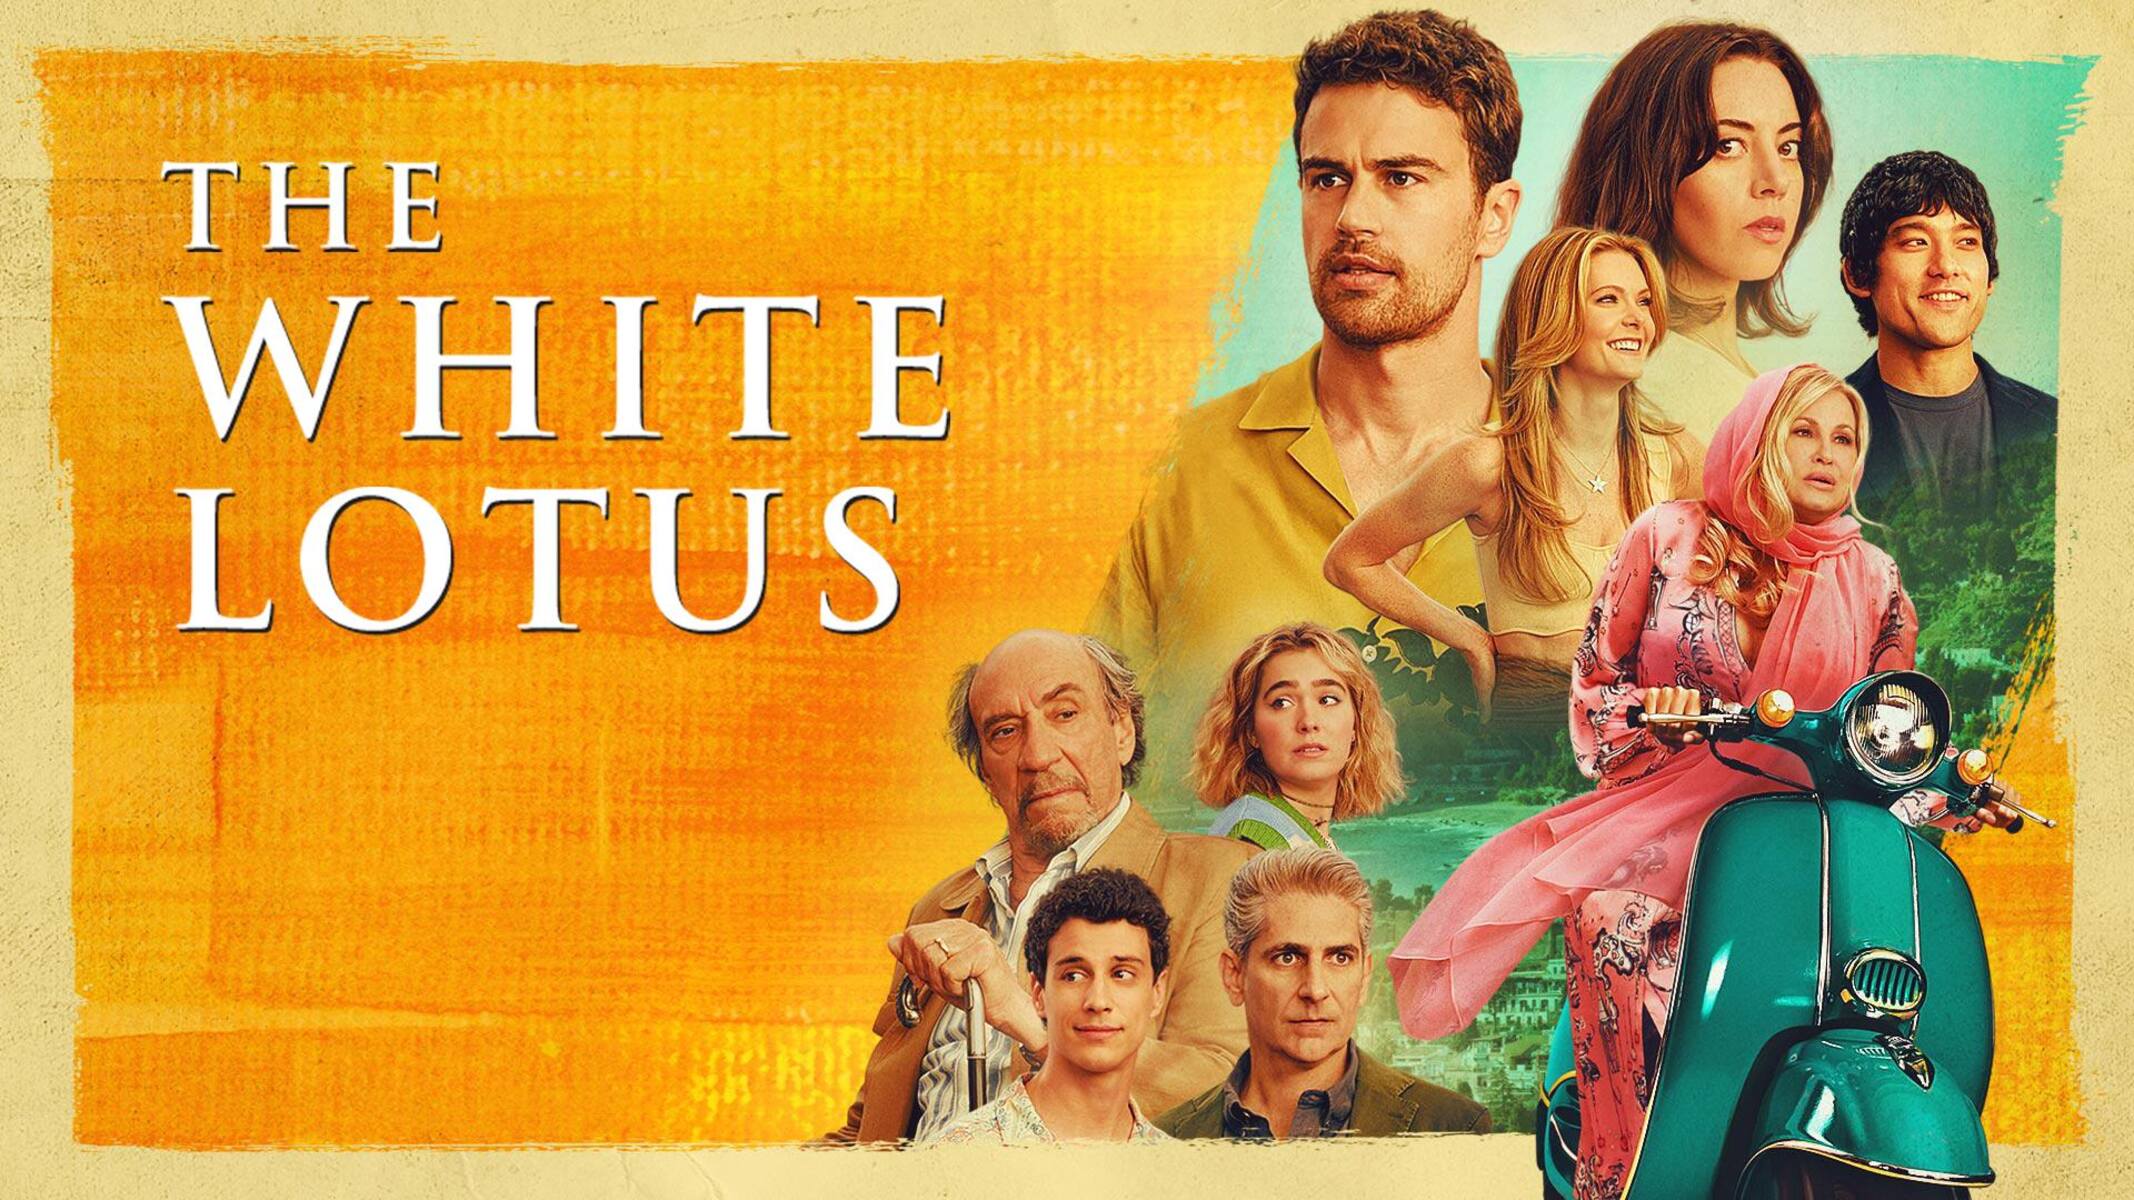 How To Watch The White Lotus